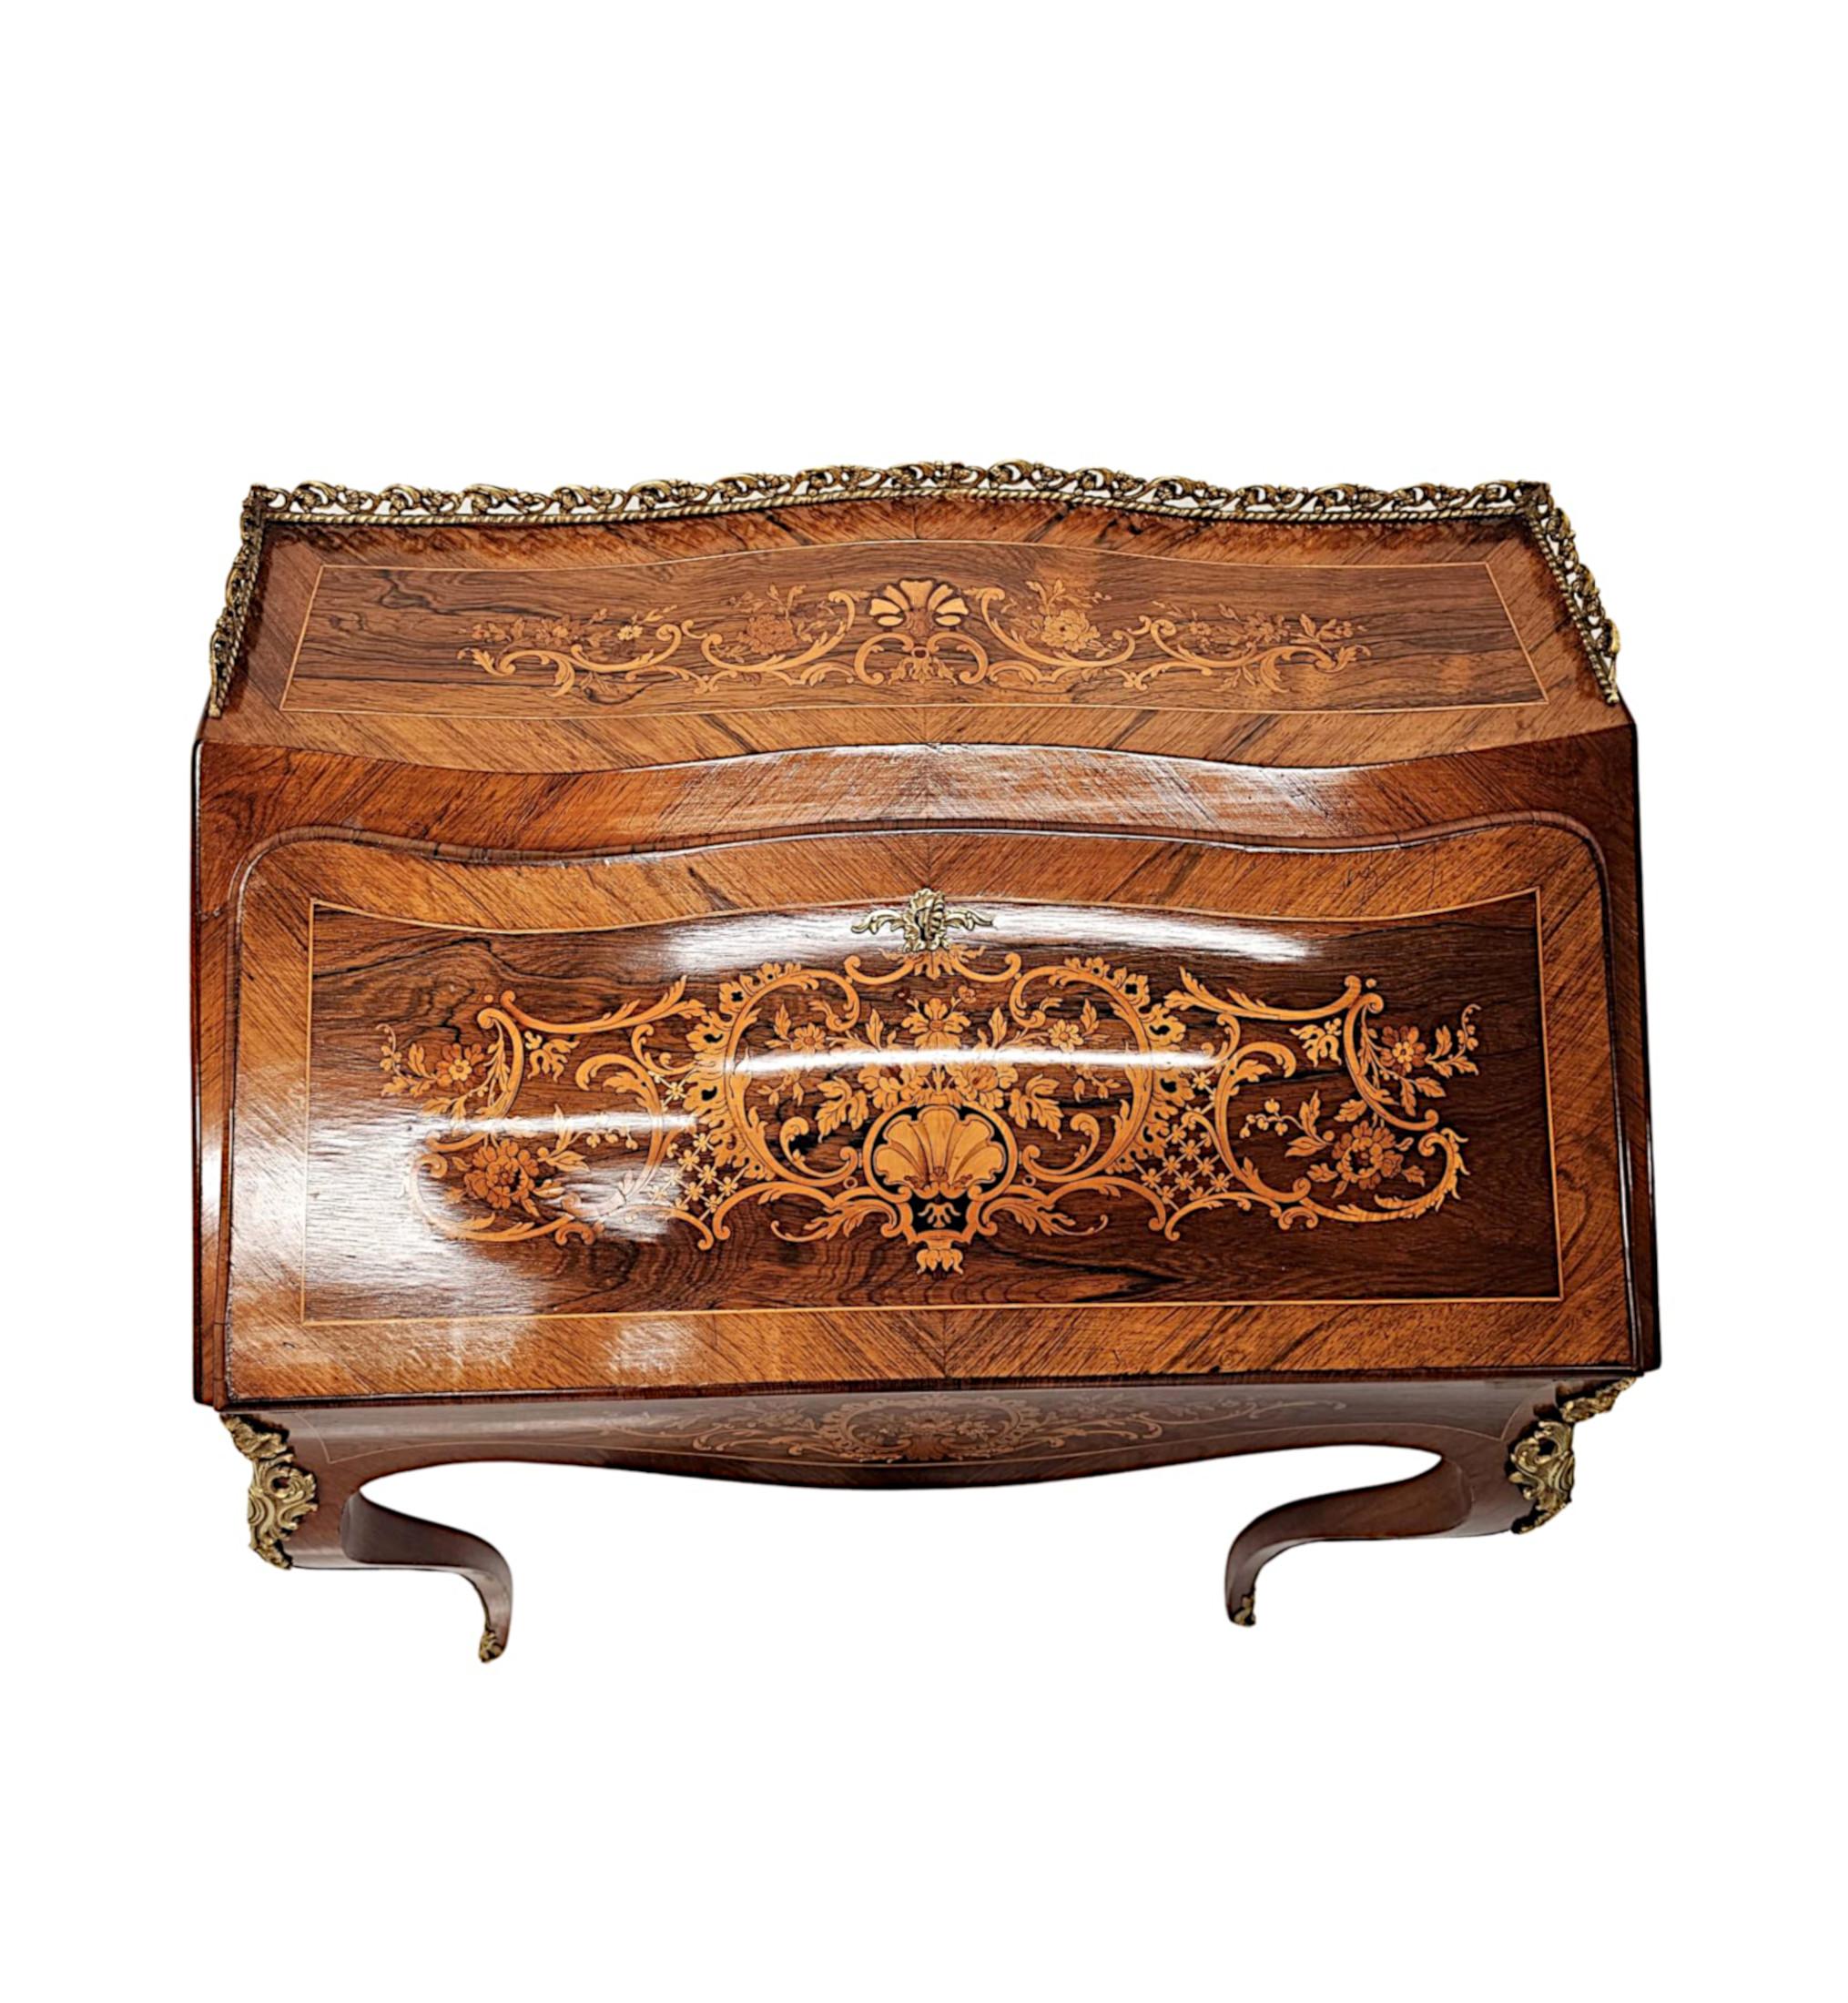 A Very Fine 19th Century Marquetry Inlaid Bureau Du Dame For Sale 3